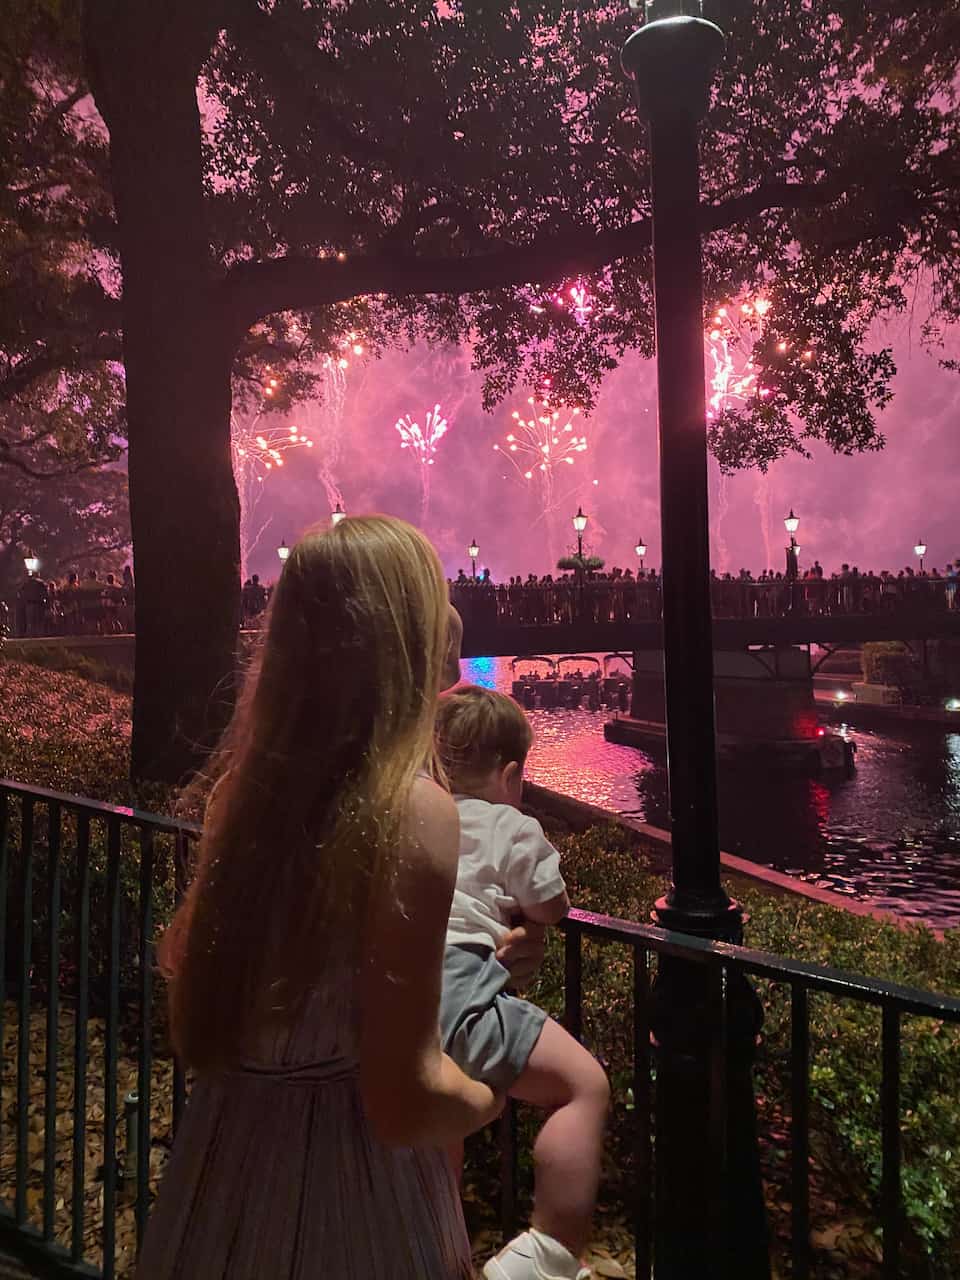 Erin and her son at Epcot watching fireworks